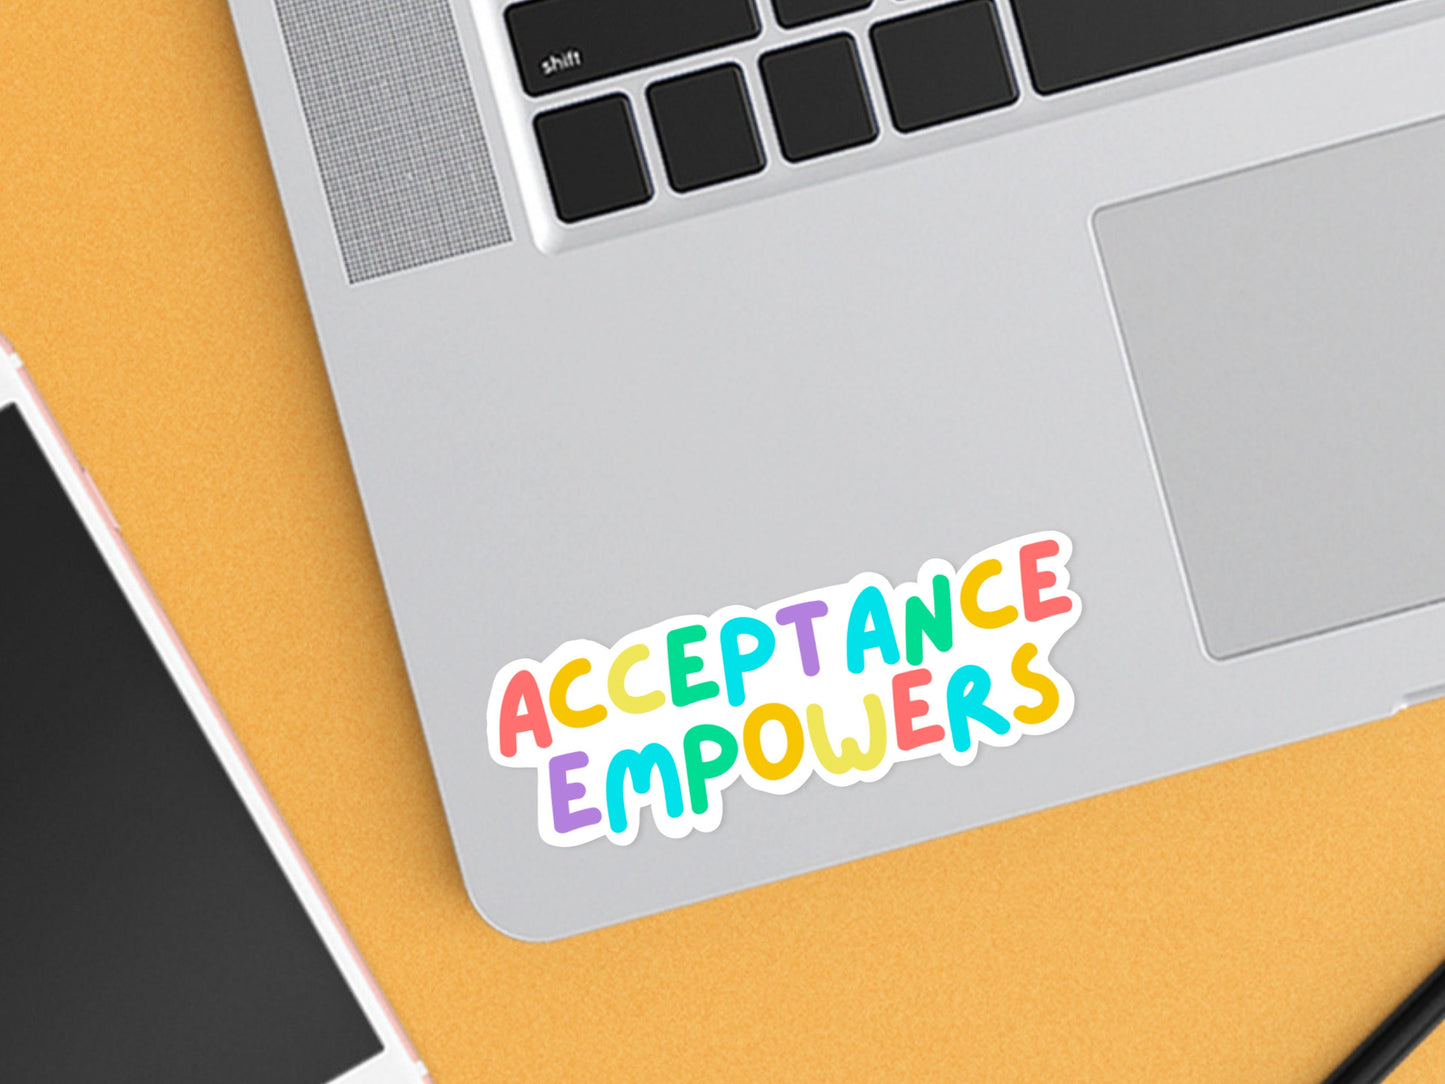 Acceptance Empowers Sticker | Aesthetic Sticker | Positivity Decal